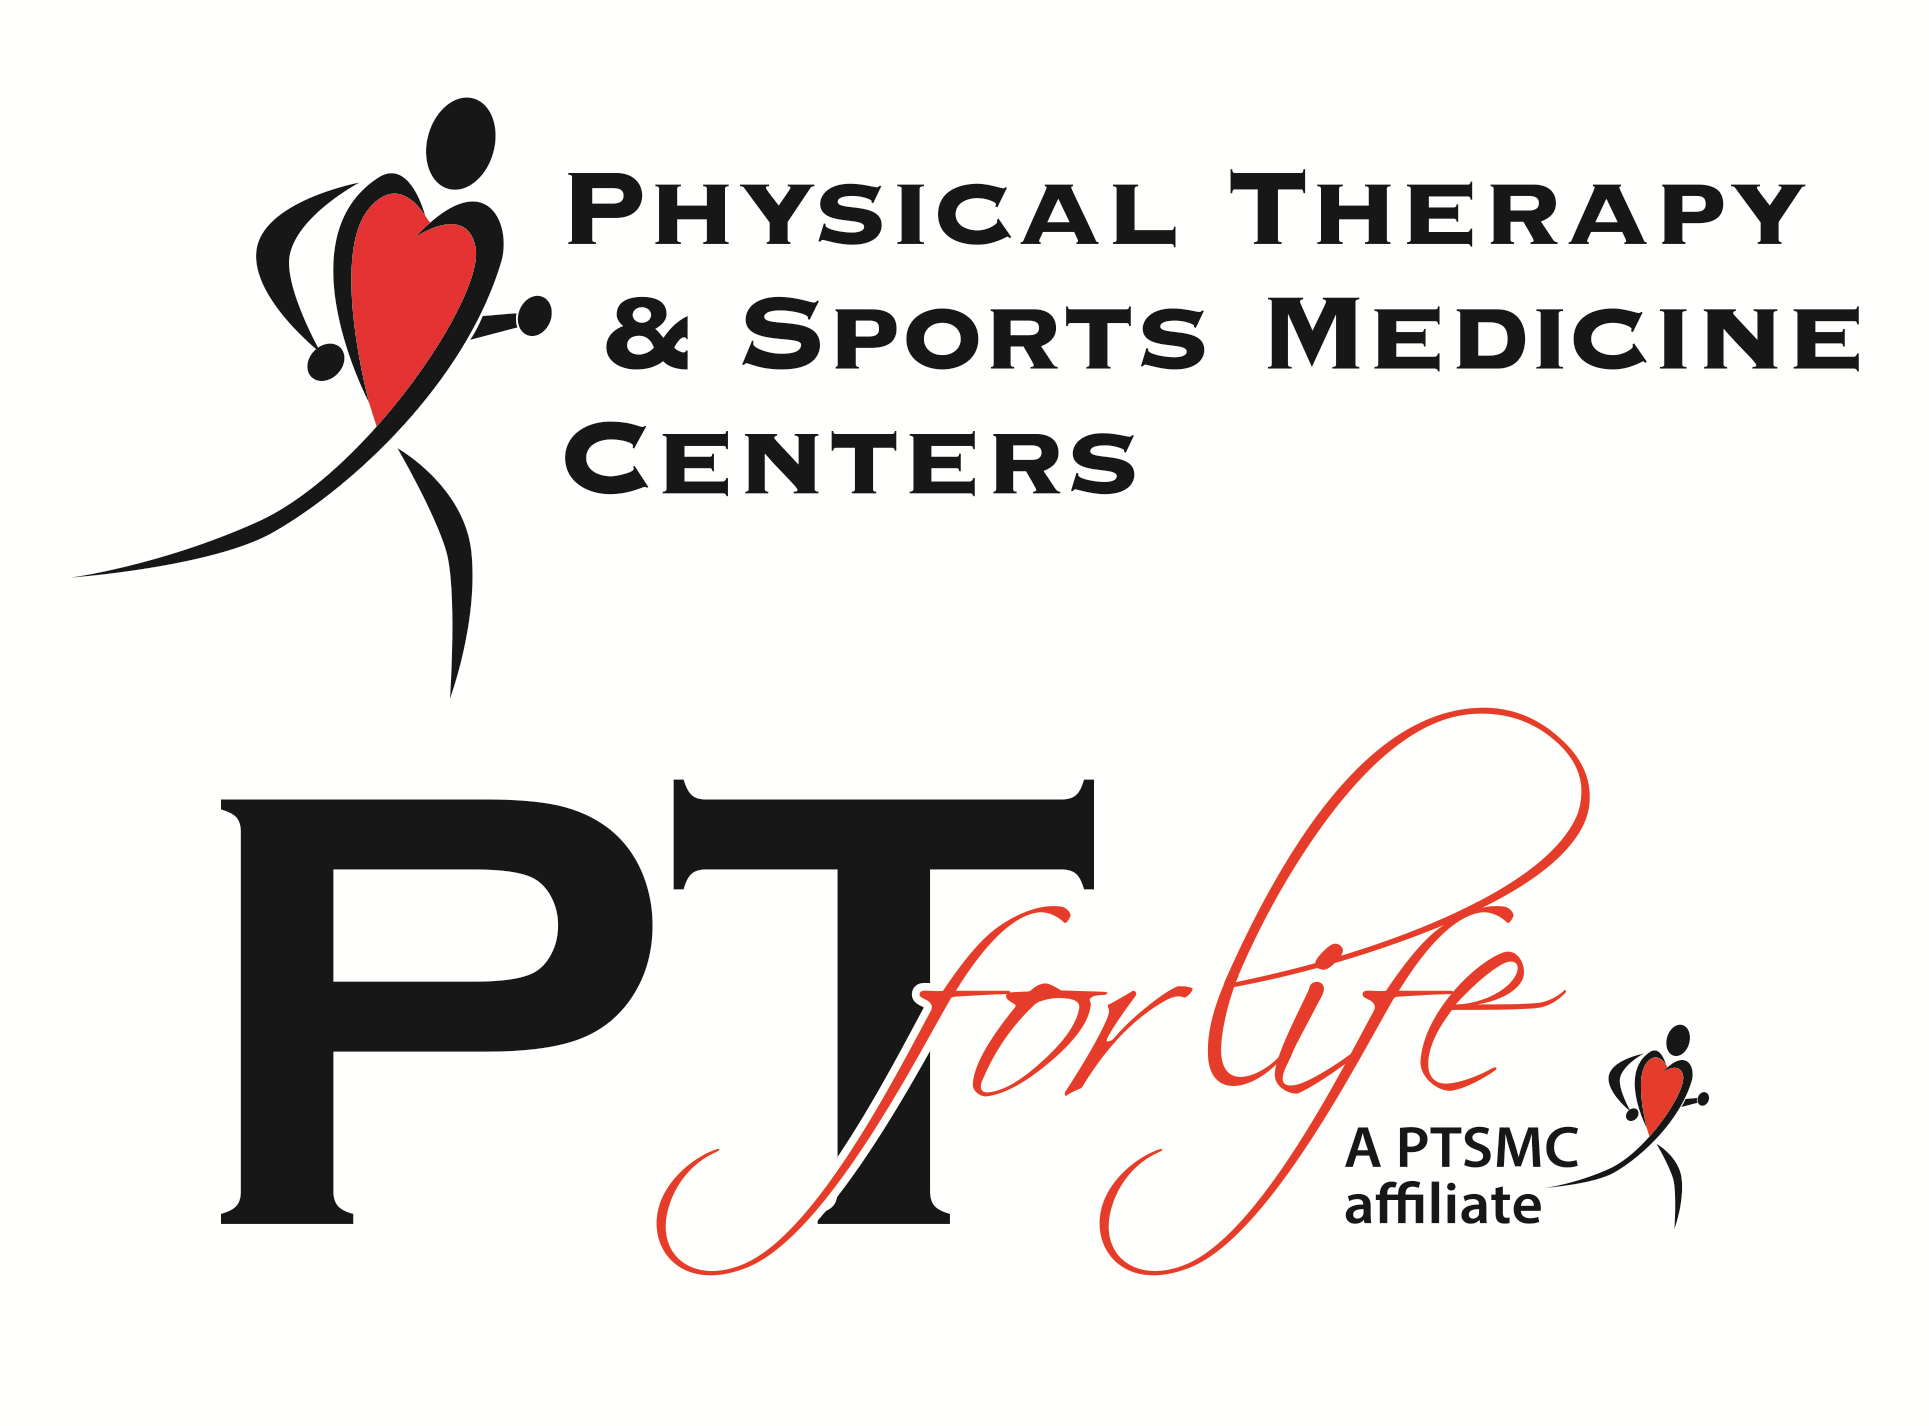 Physical Therapy & Sports Medicine Centers (PTSMC) logo